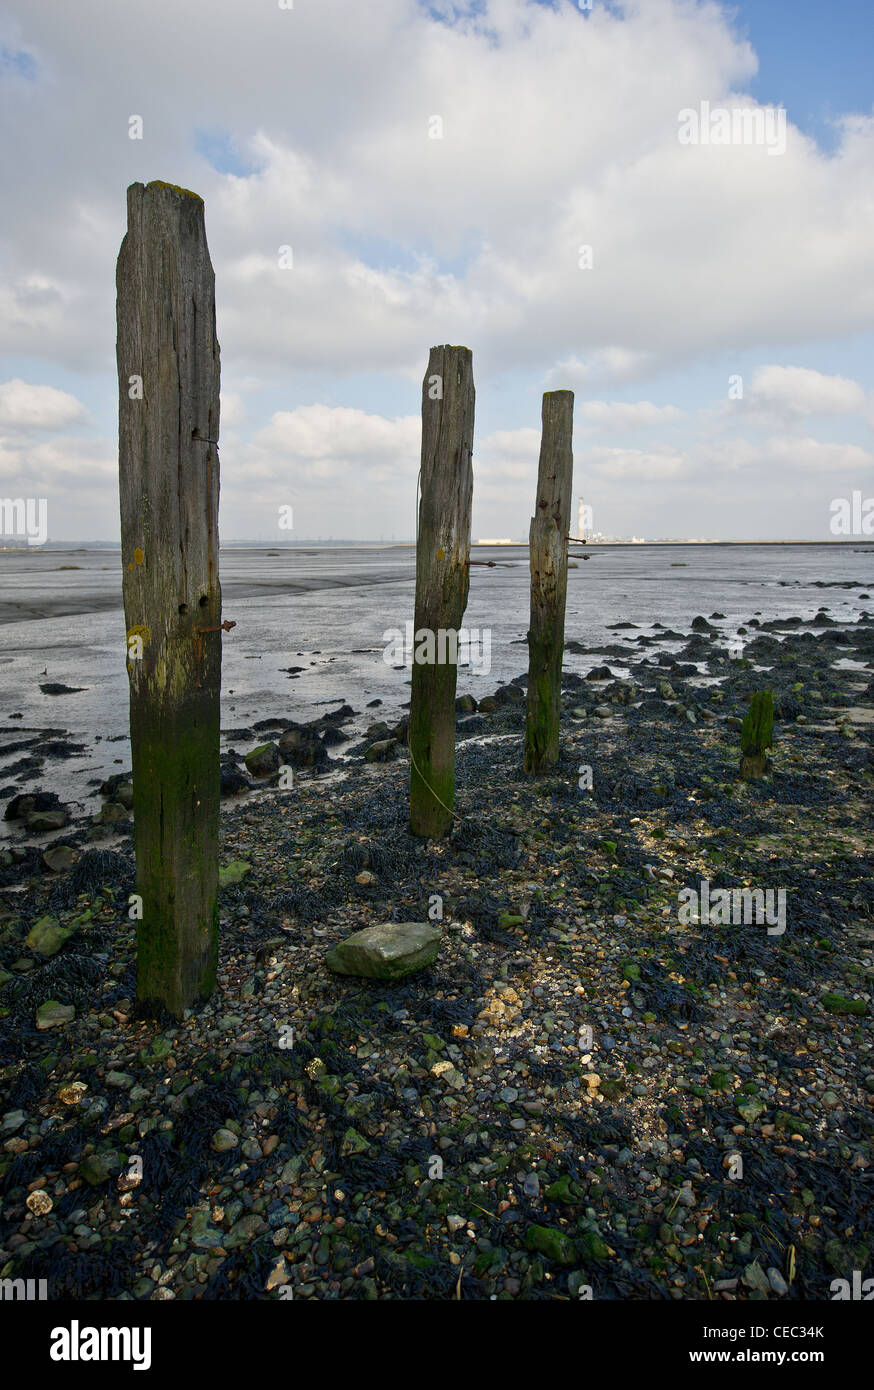 The remains of a wooden jetty on the banks of the River Medway Stock Photo